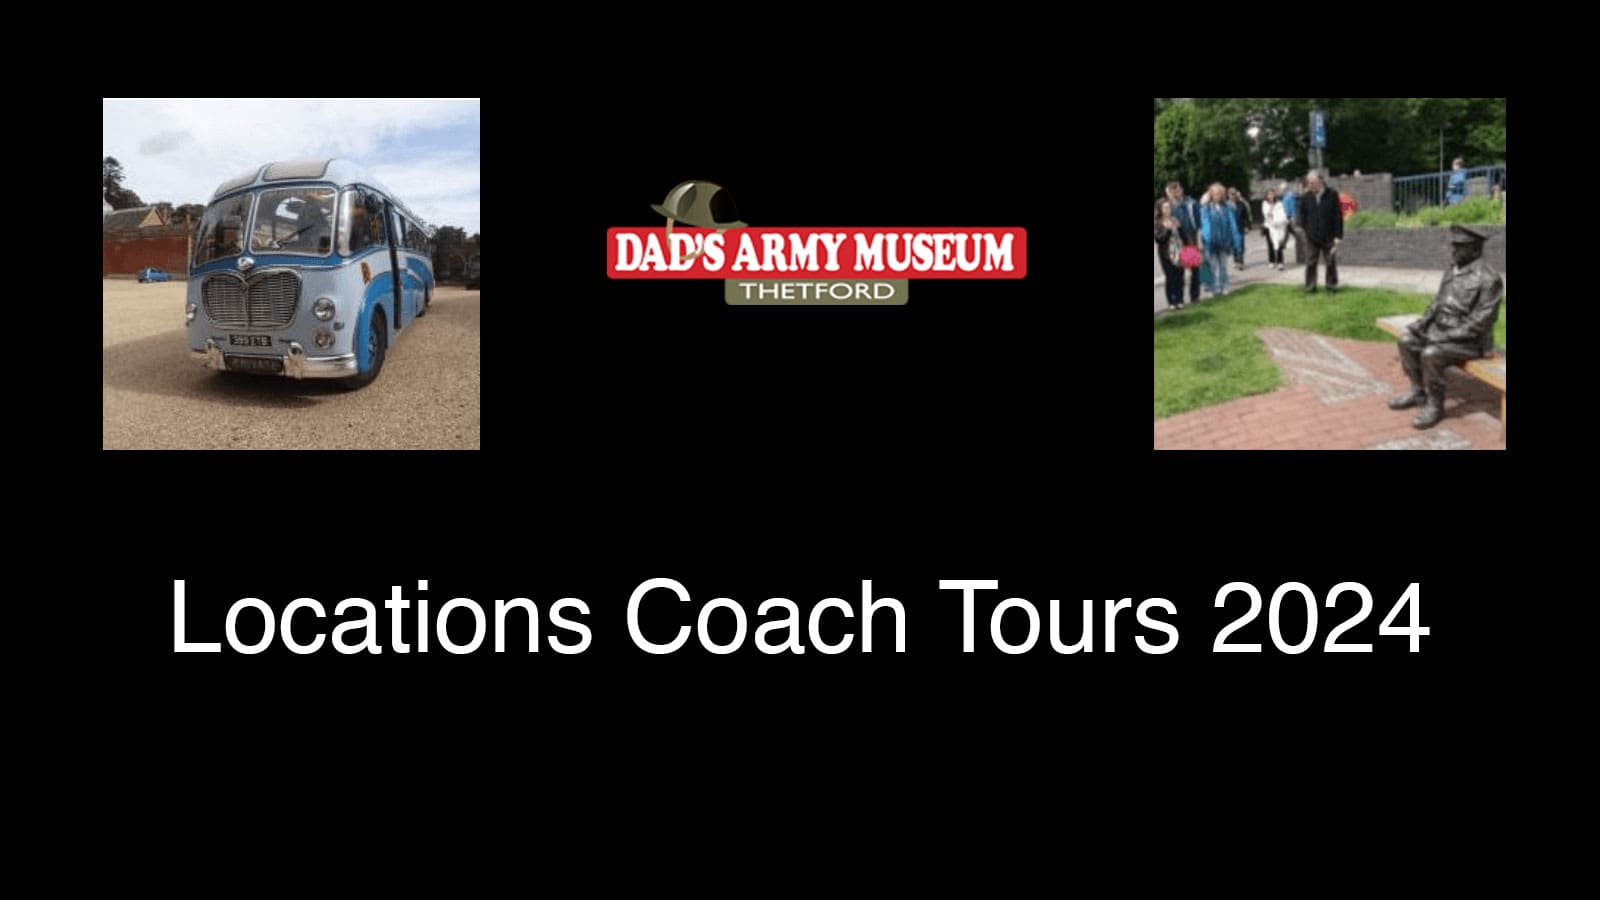 Dad’s Army Museum Locations Coach Tours 2024 Thetford Bubbly Hub